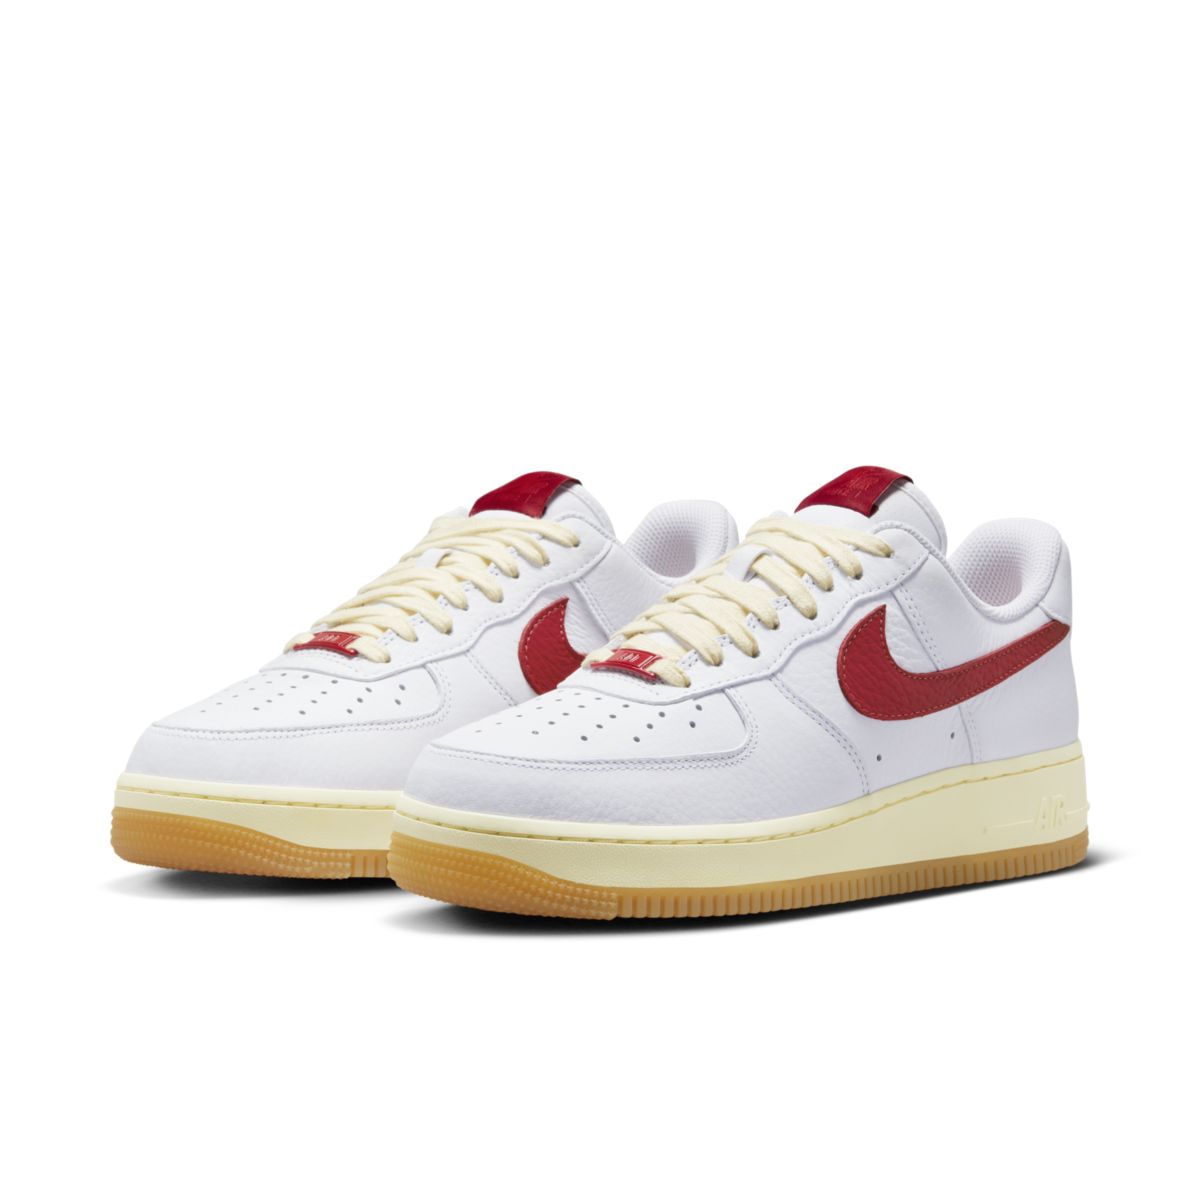 Nike Air Force 1 Low Summit White University Red FN3493-100 4